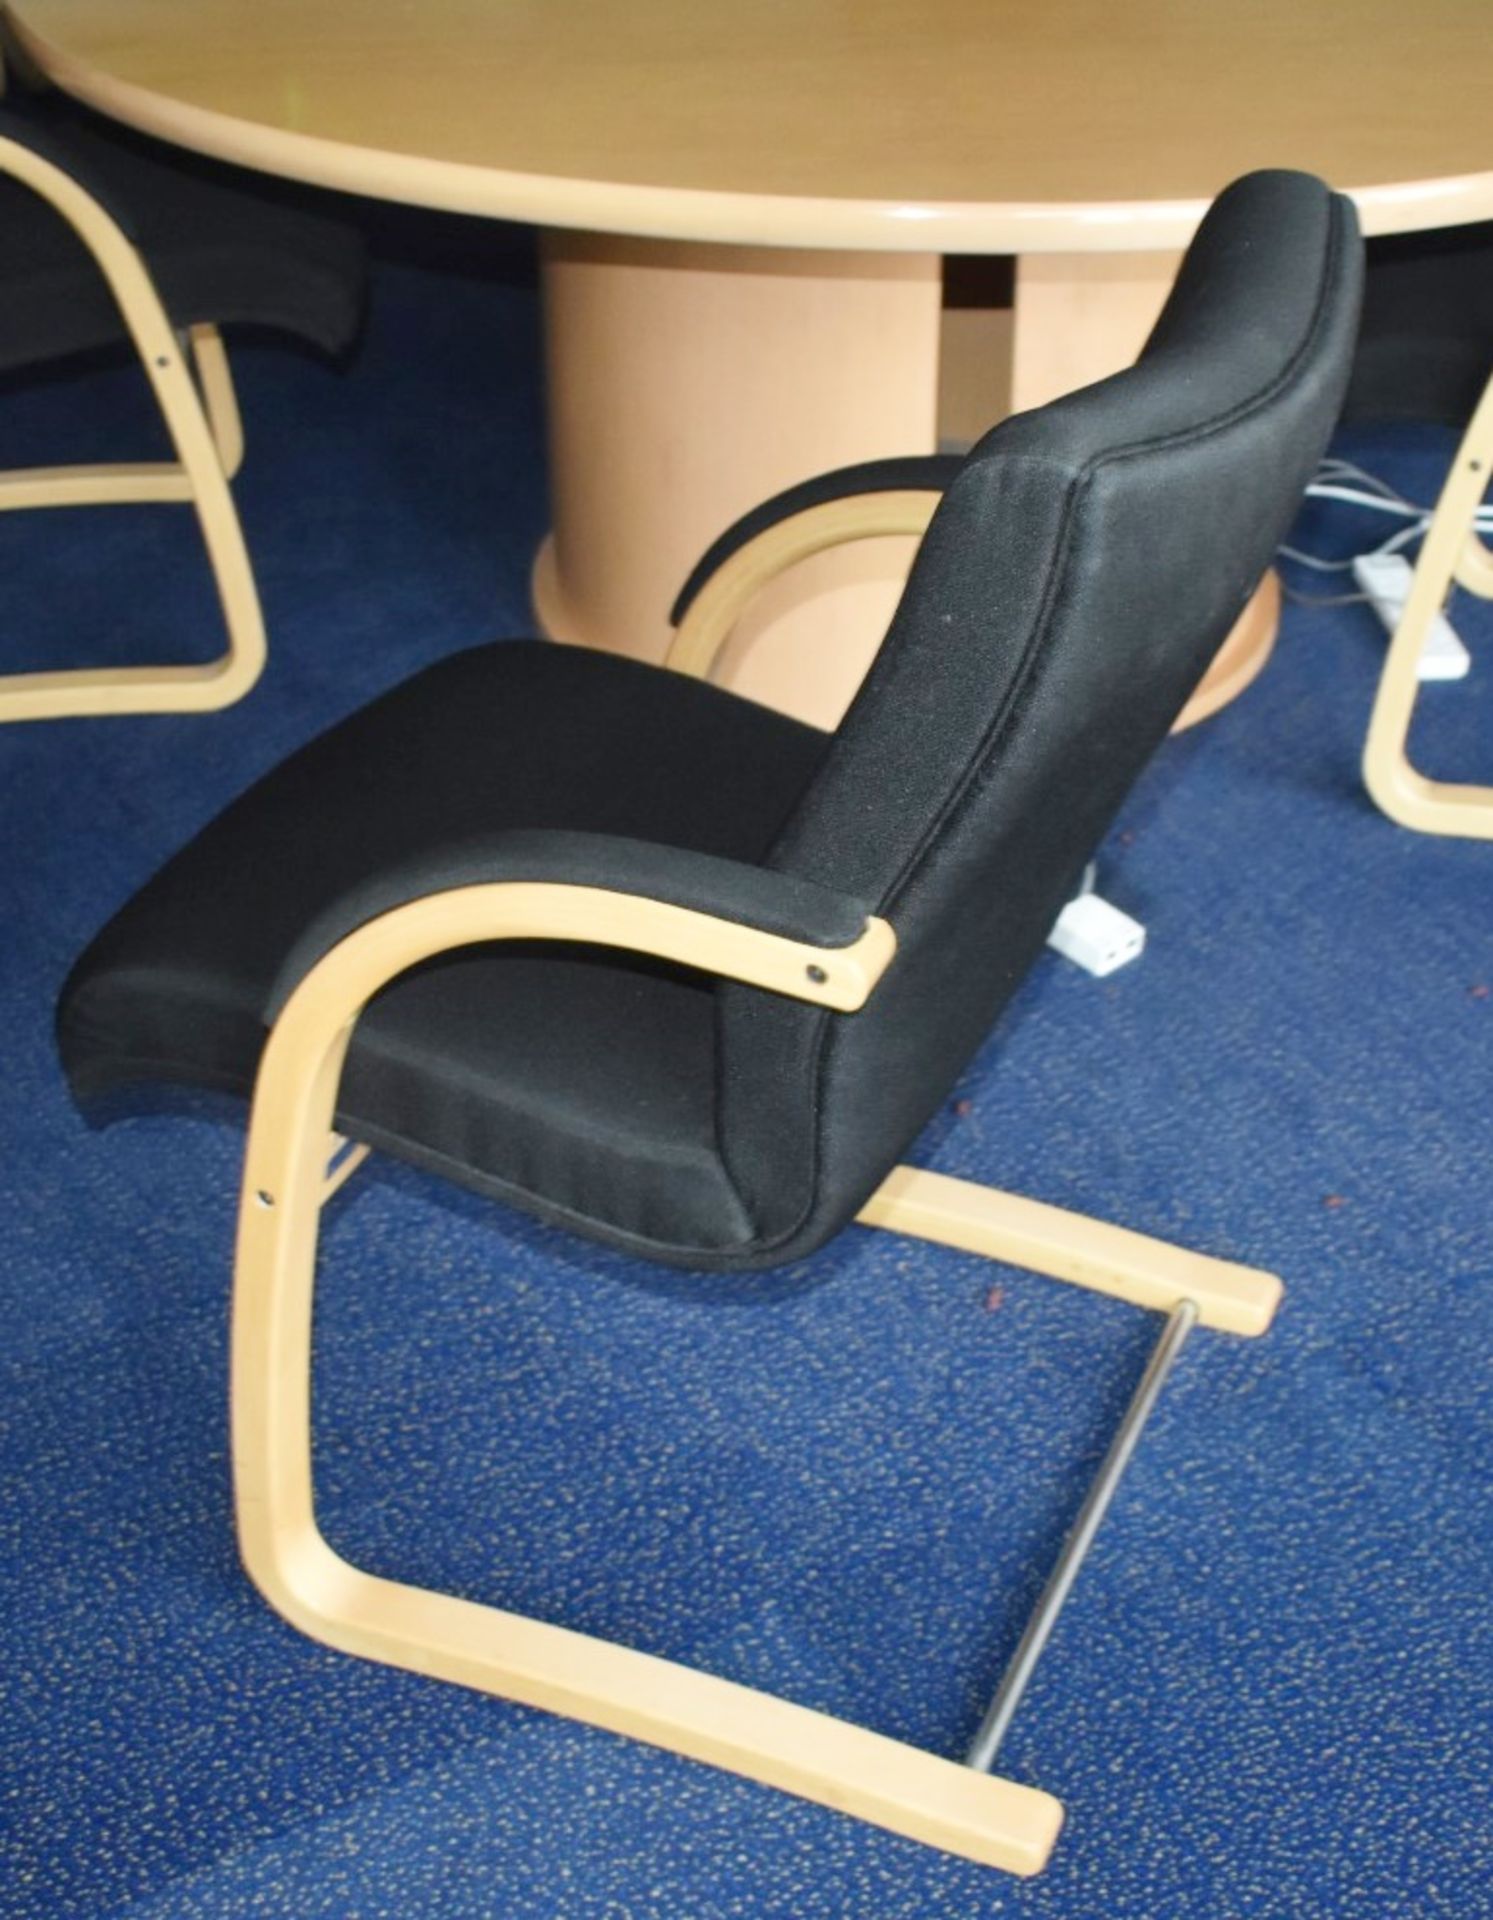 13 x Cantilever Office Meeting Chairs With Bentwood Frames and Black Fabric Seats - H87 x W48 x - Image 4 of 7